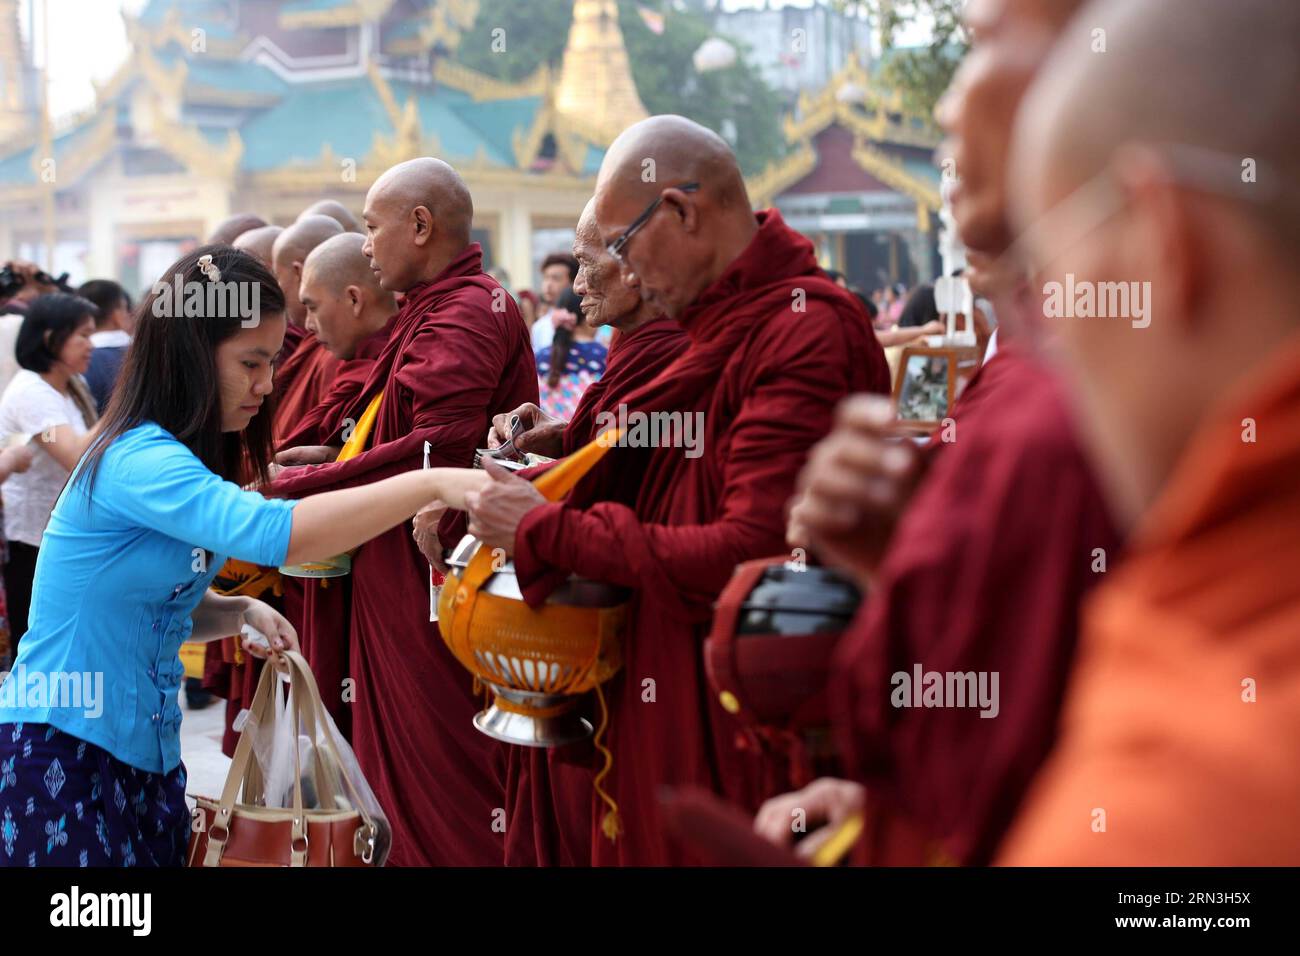 (150417) -- YANGON, April 17, 2015 -- A woman donates cash to buddhist monks on the first day of Myanmar s new year at the world-famous Shwedagon Pagoda in Yangon, Myanmar, April 17, 2015. On the first day of Myanmar s new year, people in the country used to perform meritorious deeds and Buddhists, who account for the majority of the people, usually go to the pagodas, monasteries and meditation centers where they practice meditation. ) MYANMAR-YANGON-NEW YEAR UxAung PUBLICATIONxNOTxINxCHN   Yangon April 17 2015 a Woman donate Cash to Buddhist Monks ON The First Day of Myanmar S New Year AT The Stock Photo